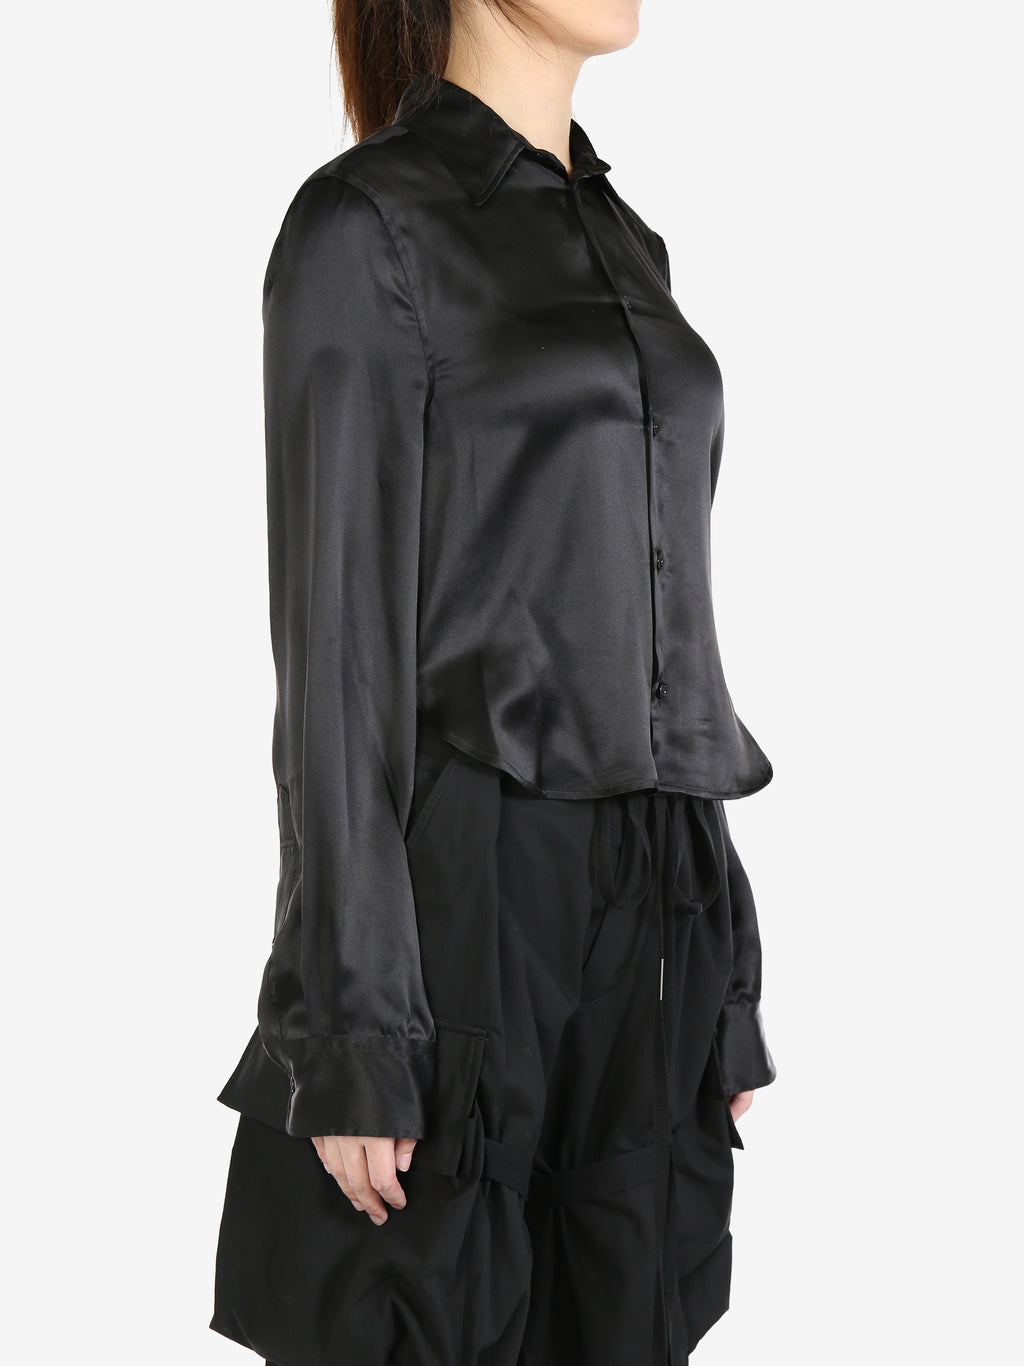 ANN DEMEULEMEESTER Women Satin Washed Silk Black Fira Rounded Cropped Slim Shirt